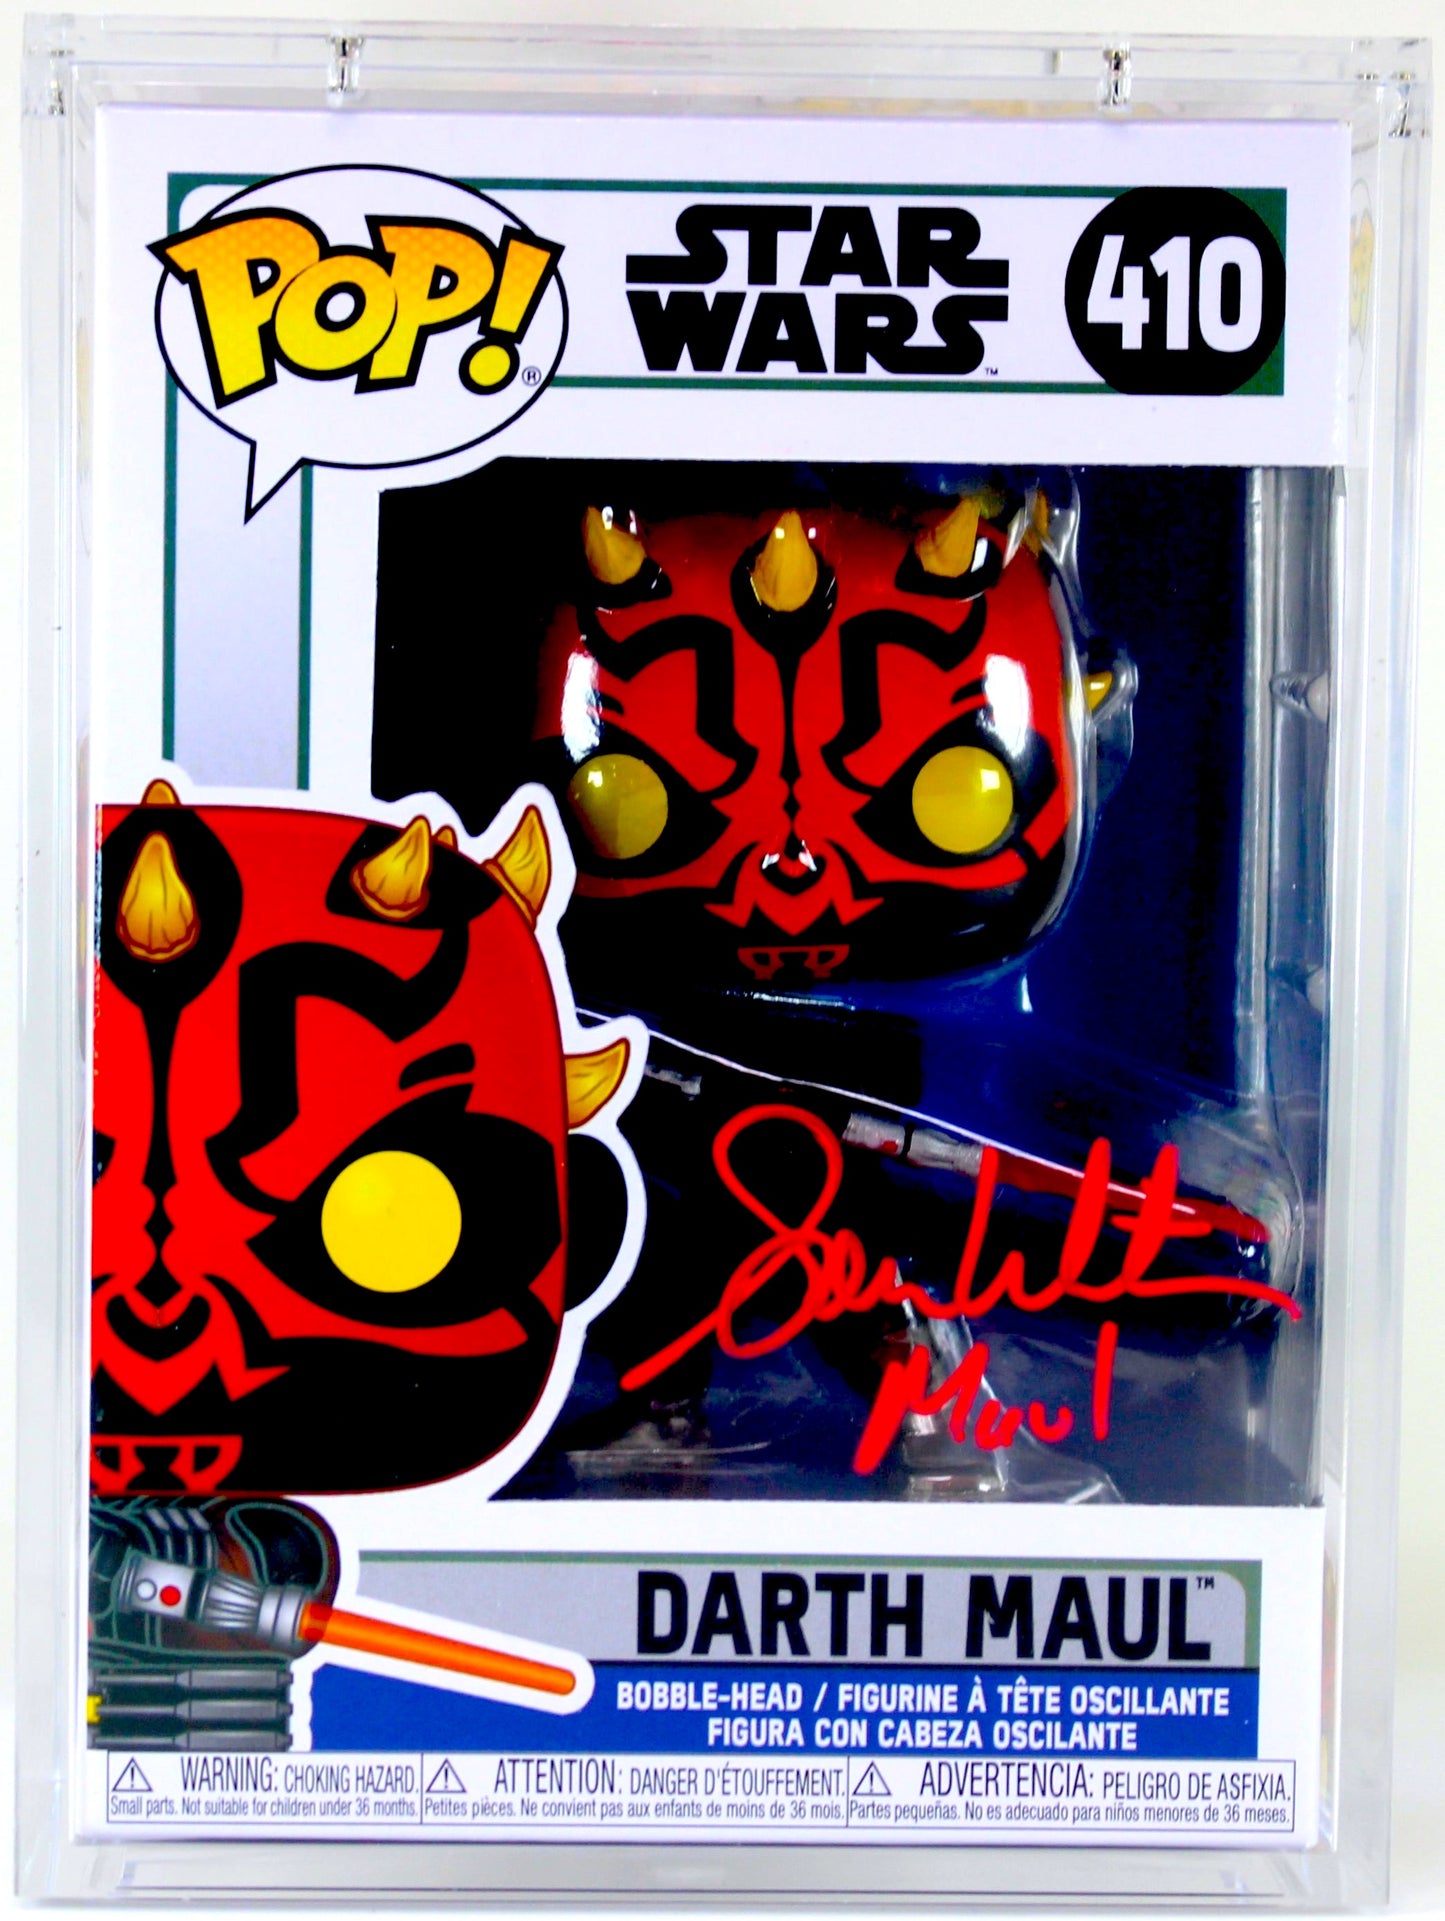 Darth Maul Signed Funko POP! Star Wars - Autographed by Sam Witwer - Signature is Authenticated By SWAU ✅ - DaFunkoShop - Funko Pop! Star Wars